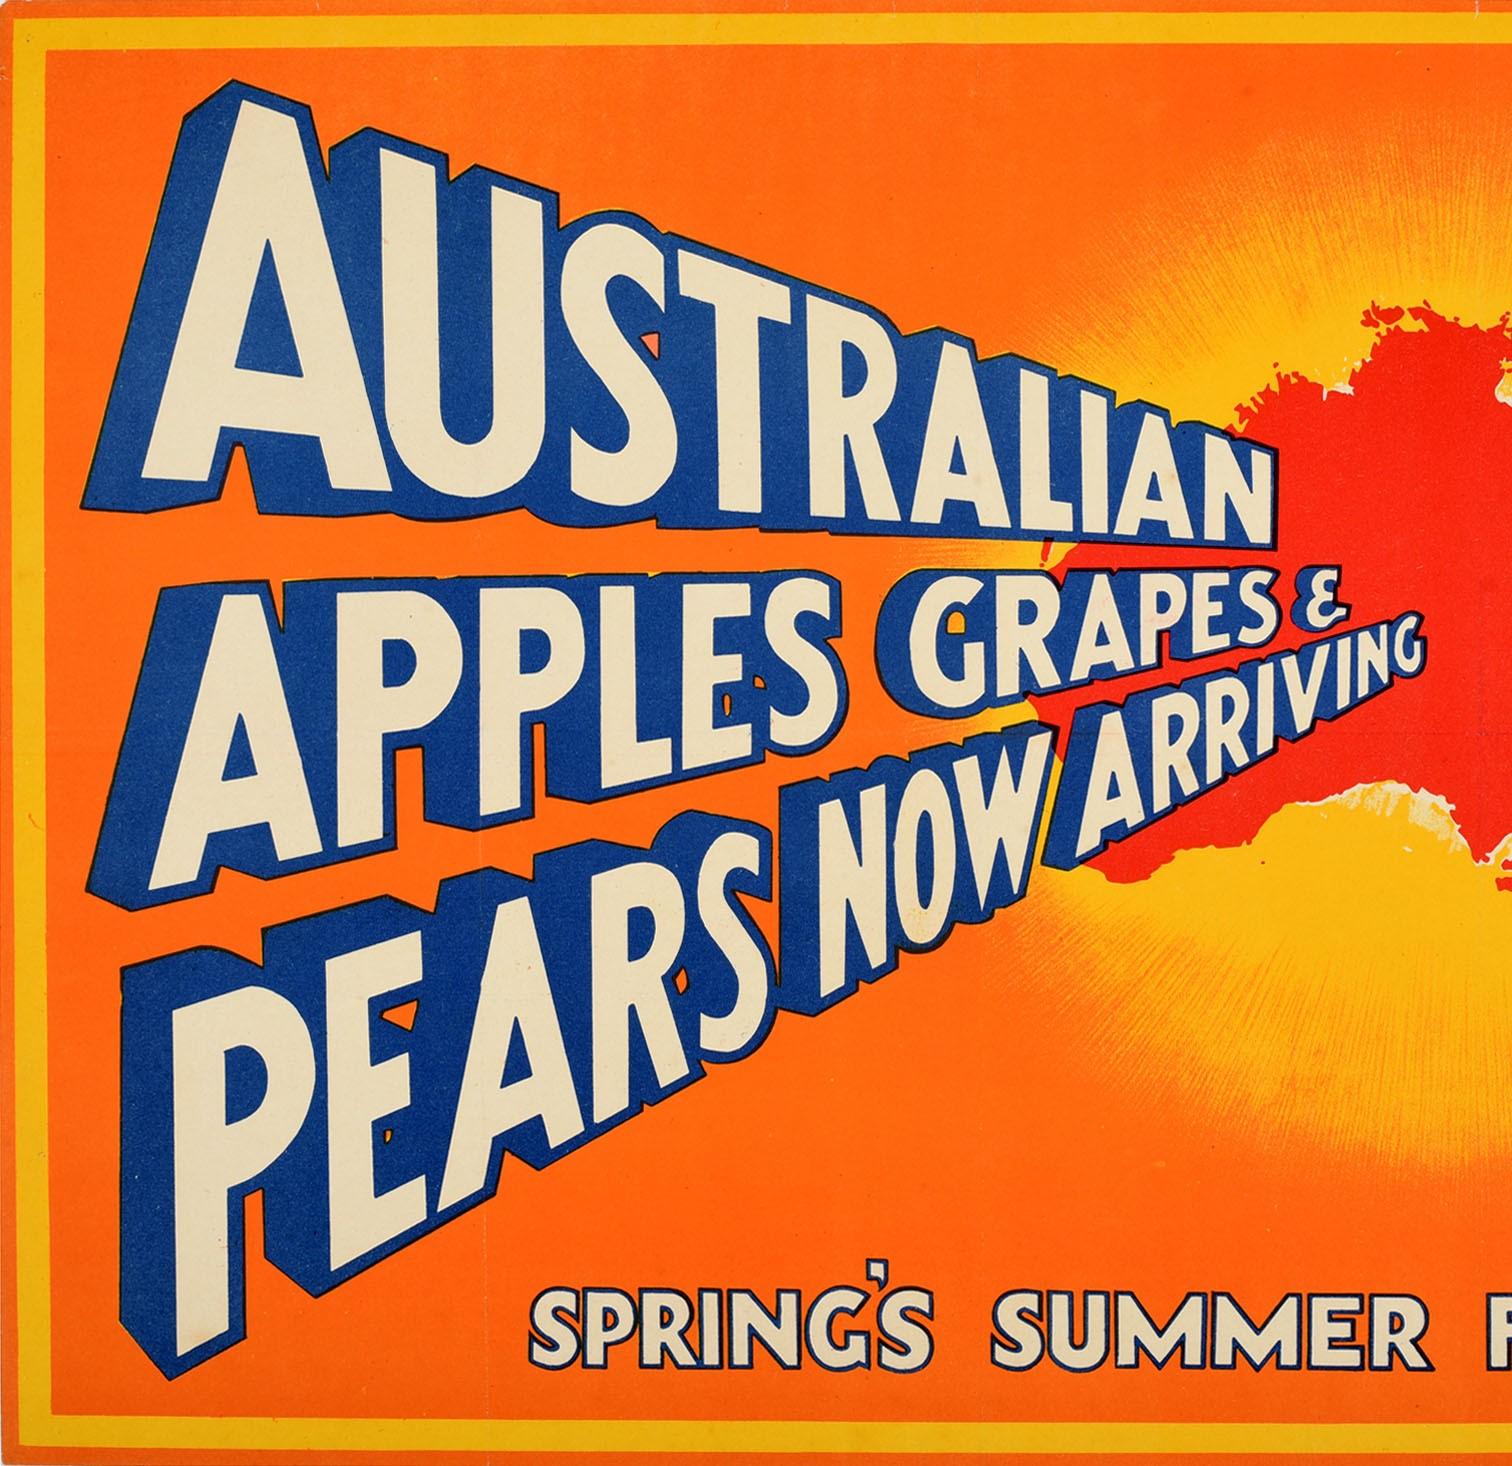 Original Vintage Fruit Poster Australia Apples Grapes Pears British Empire Trade - Print by Unknown